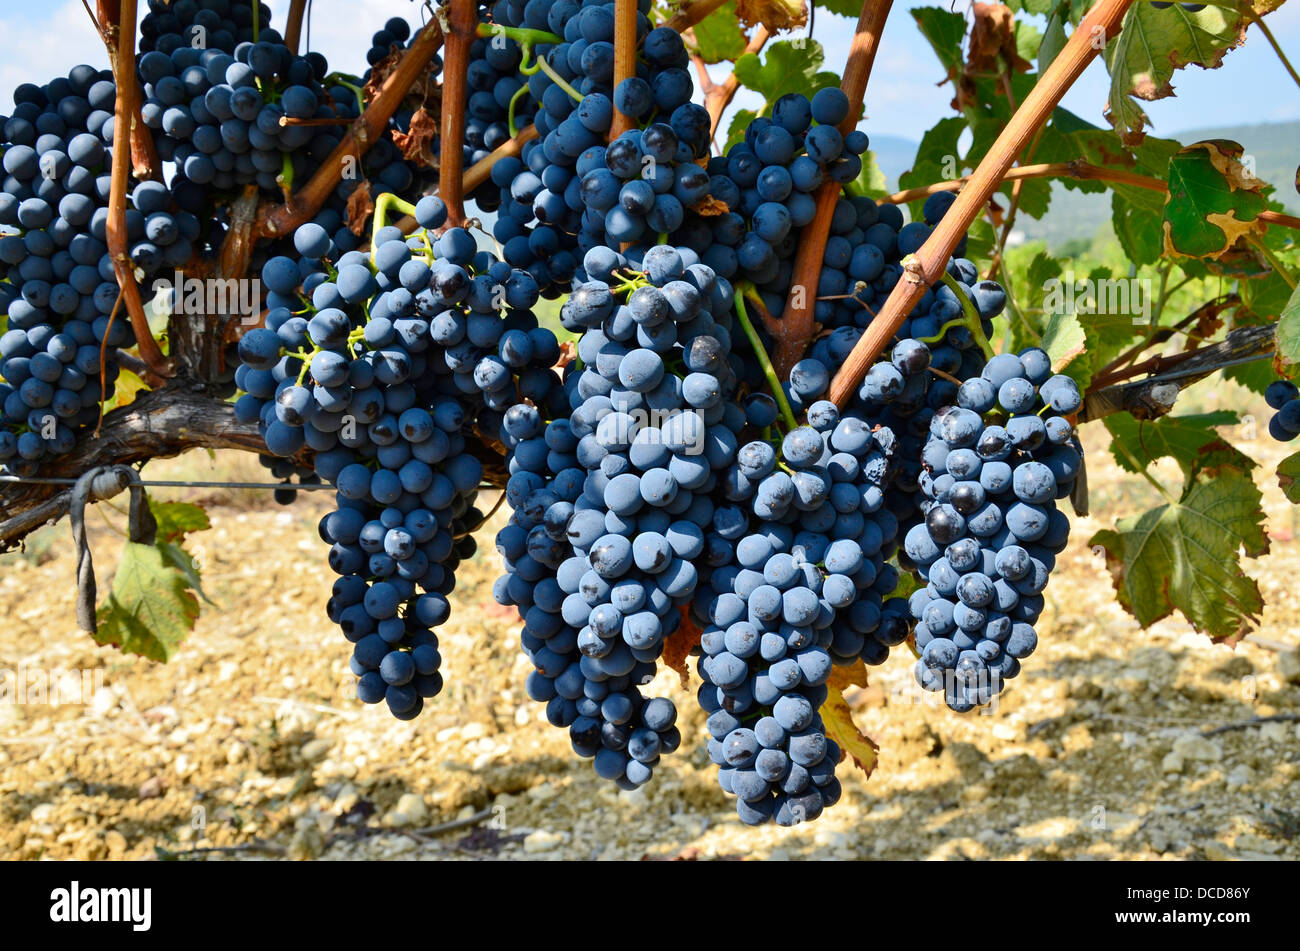 grapes A.O.C. Luberon A.O.C. full-bodied Grenache, the rich, spicy, aromatic Syrah, Cinsault and Carignan. wine growing France Stock Photo